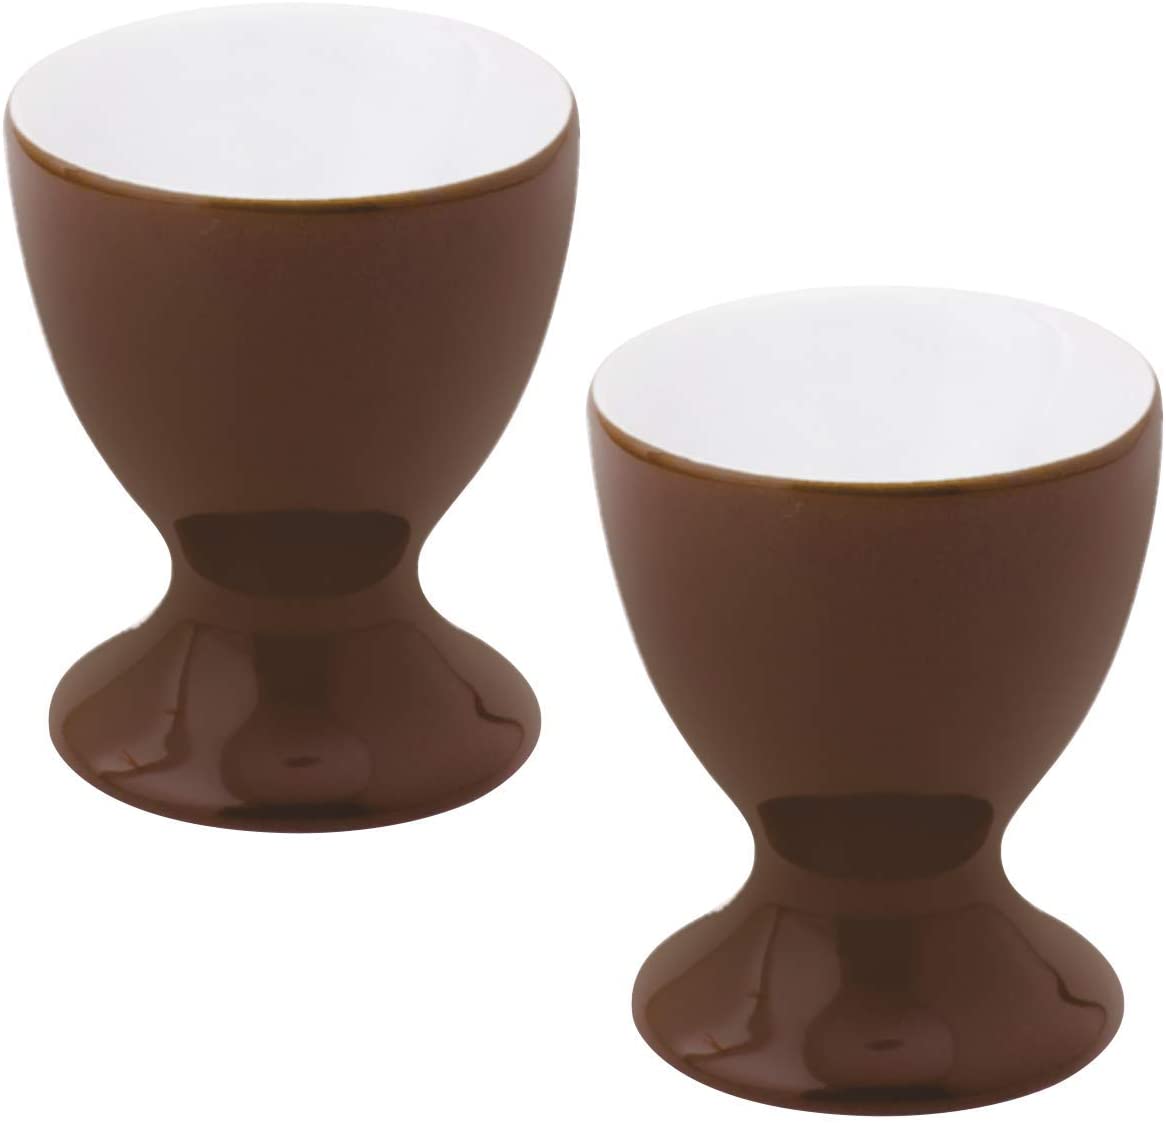 Kahla Pronto 20 ° C137 A72605X Egg Cup Set Of 2 Chocolate Brown